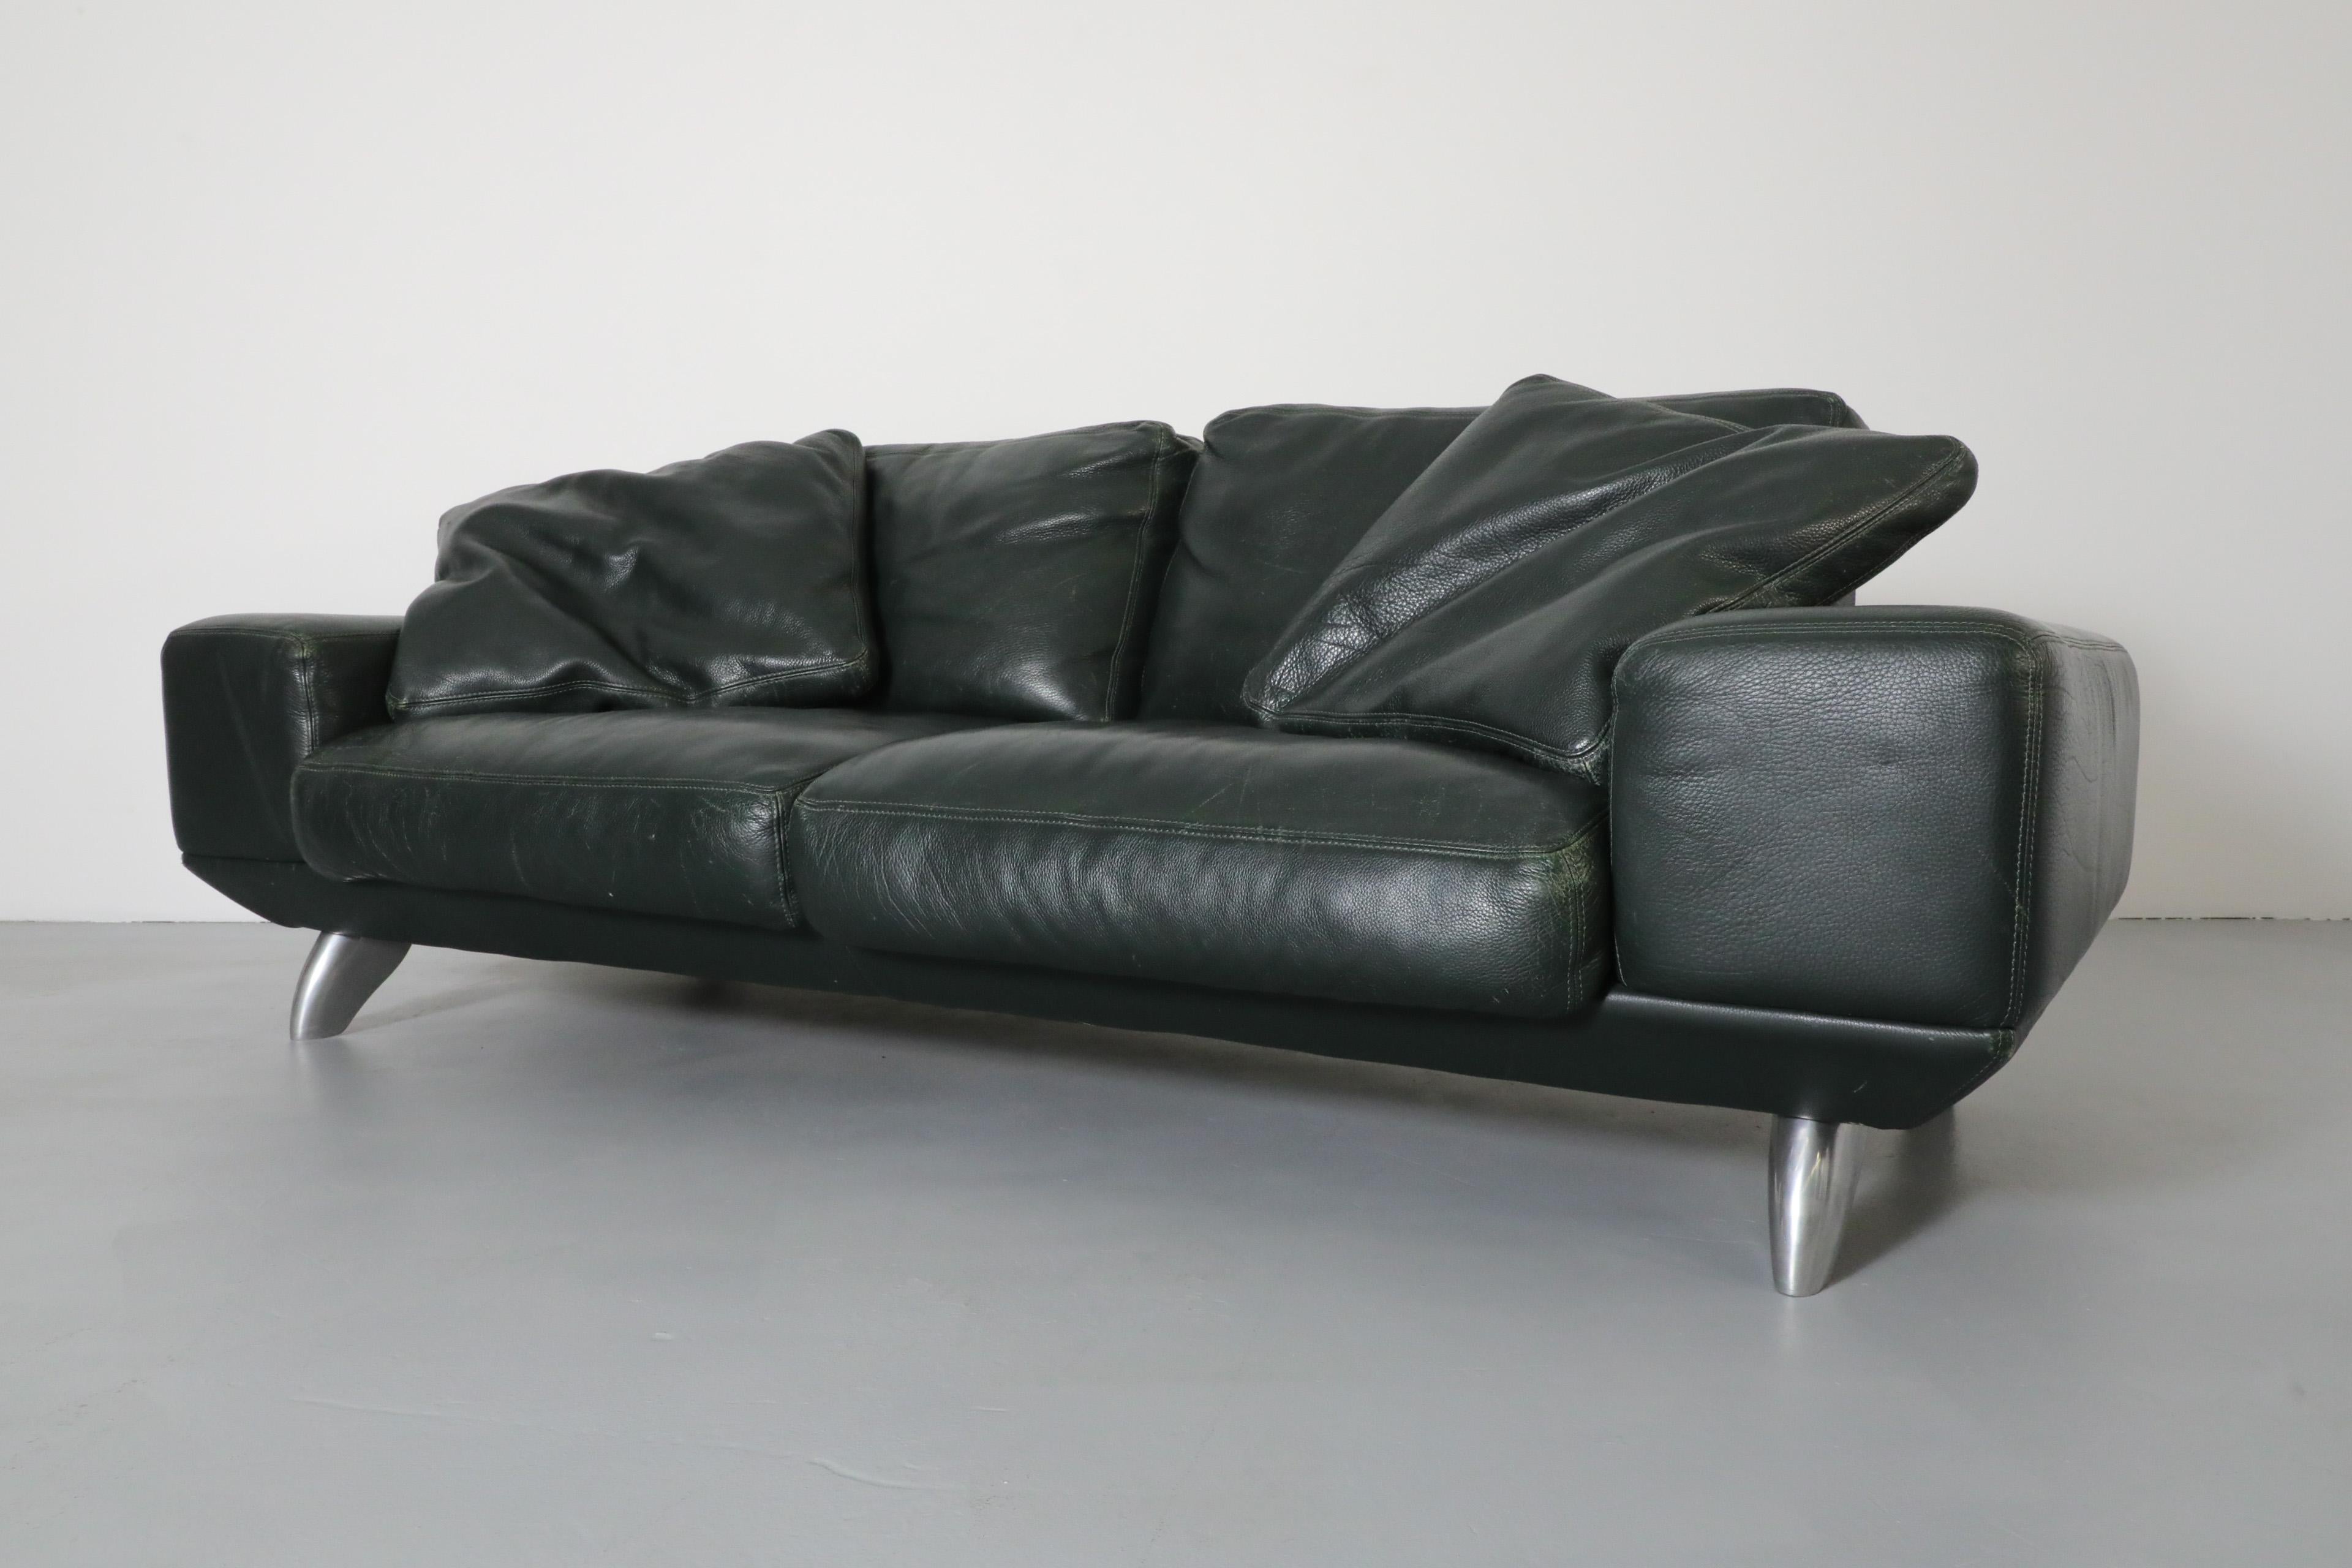 Handsome 80's Dark Green Leather Sofa by Molinari w/ Wide Arms & Metal Legs In Good Condition For Sale In Los Angeles, CA